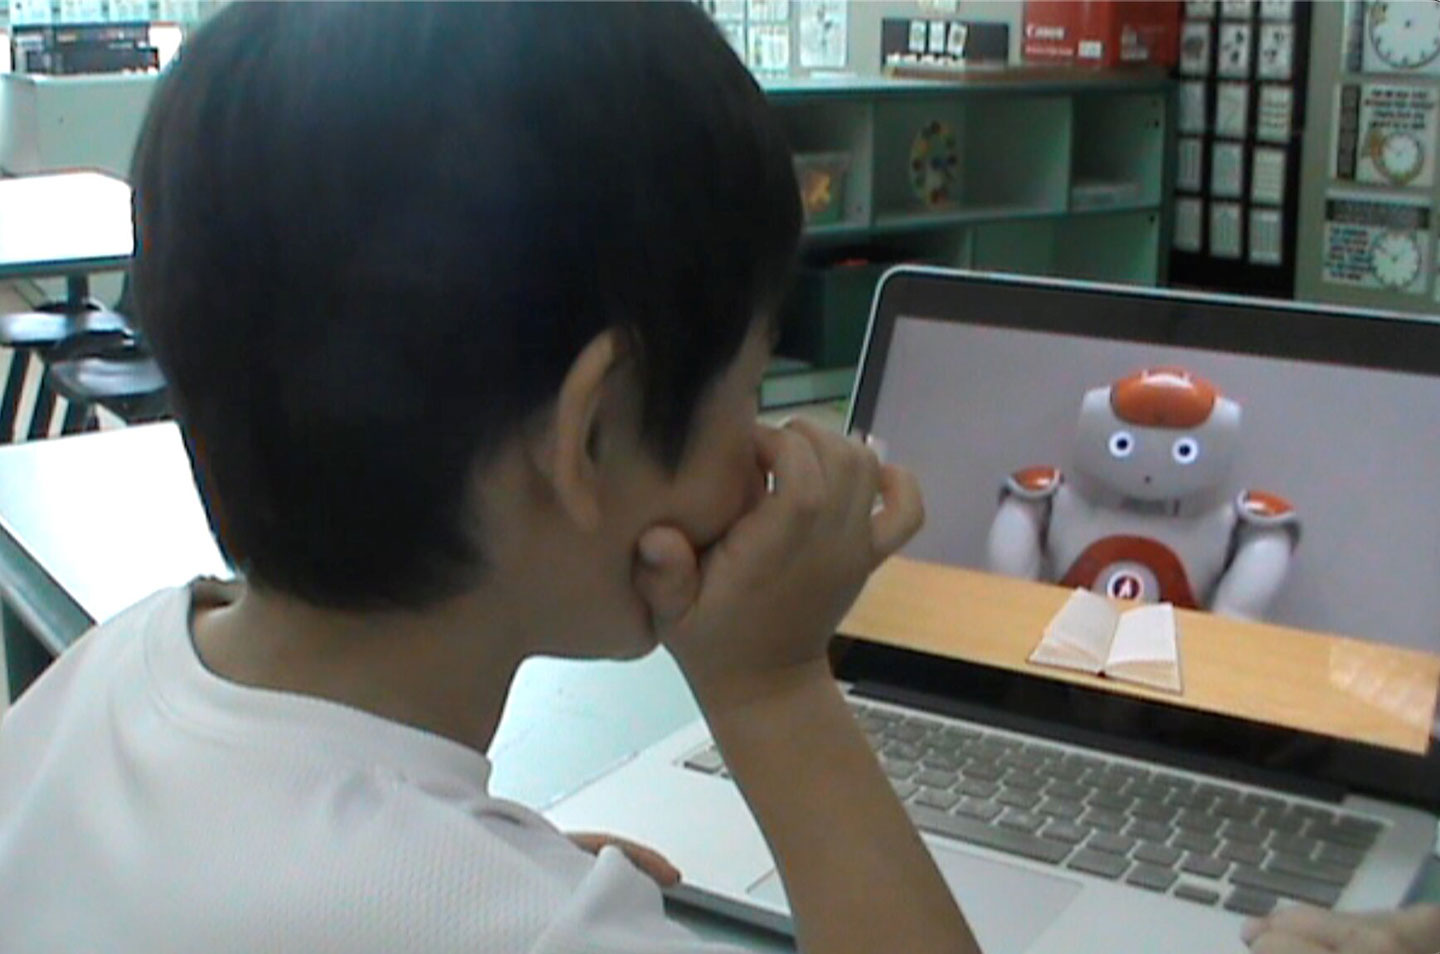 Phys.org, 22 Dec 2023, Robots vs. humans: Which do children trust more when learning new information?